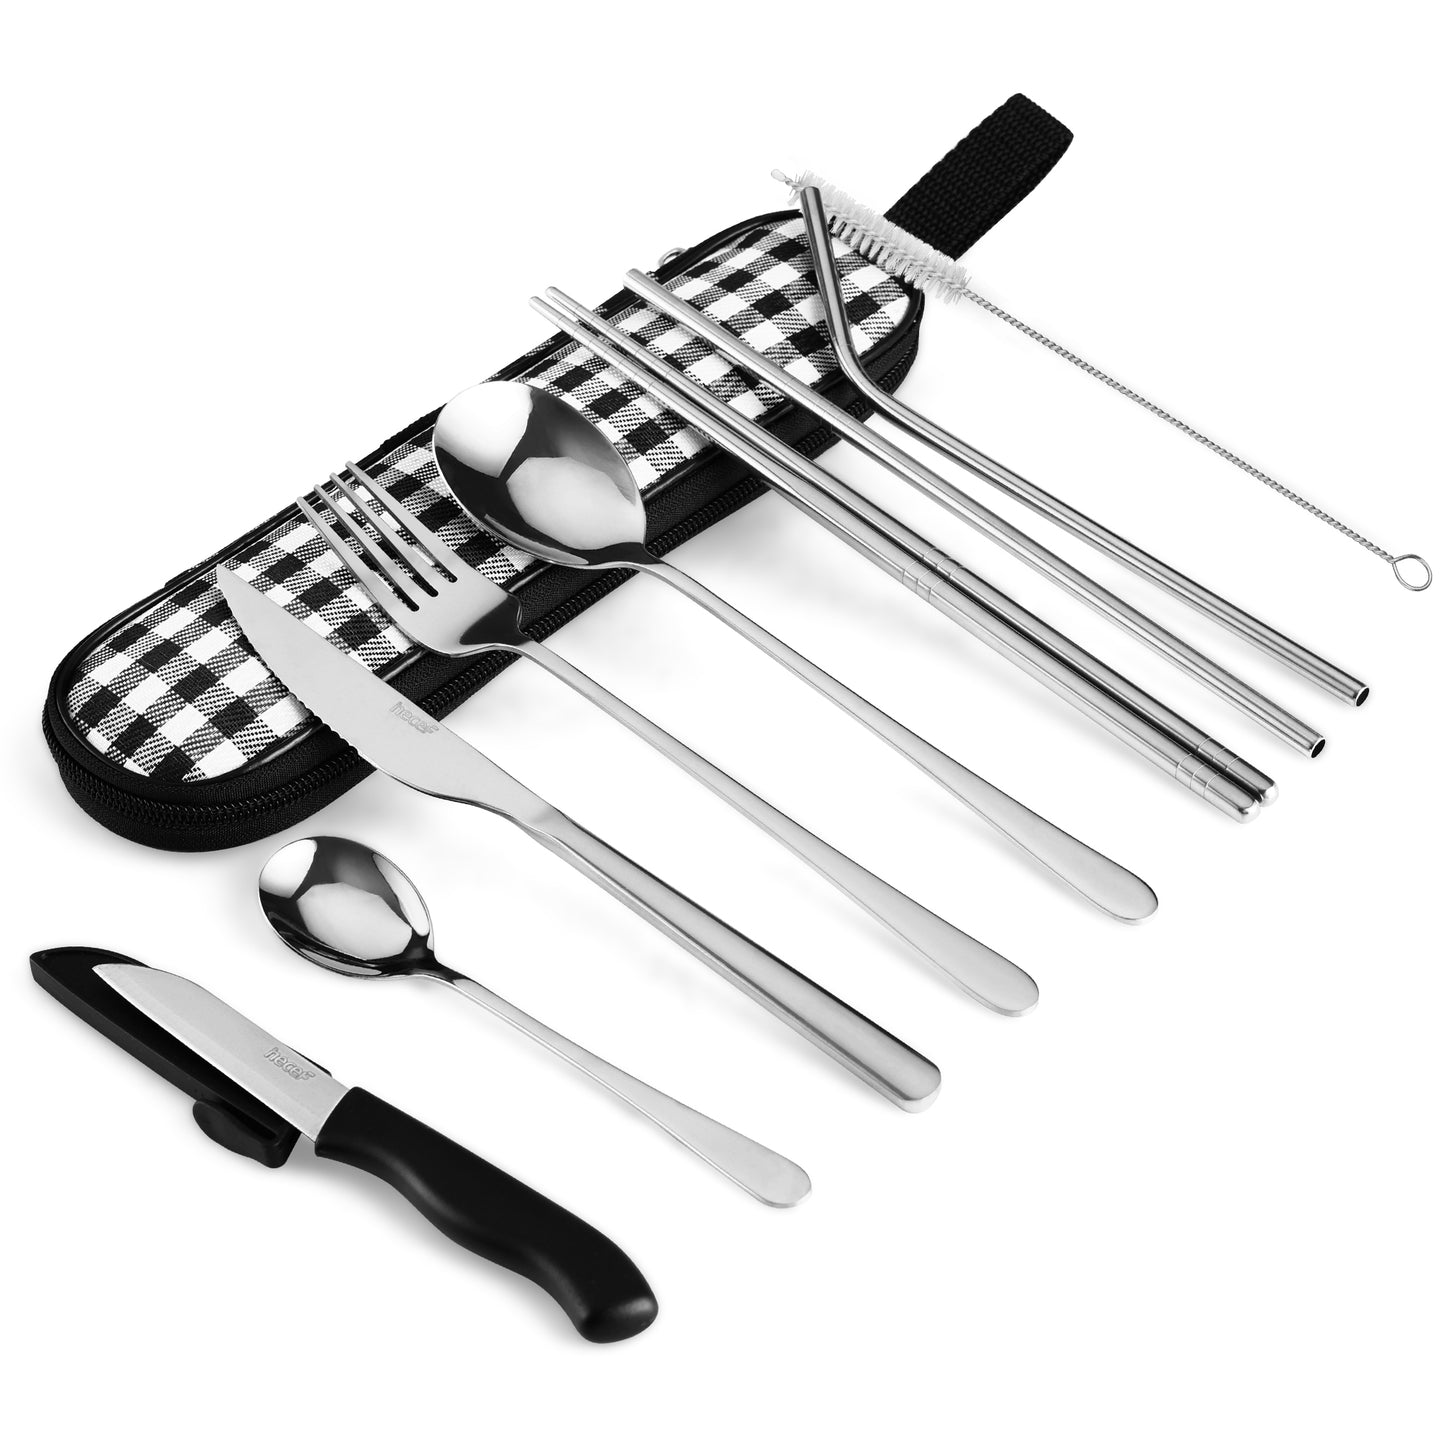 Travel Utensils,Reusable Silverware Set To Go Portable Cutlery Set with a  Waterproof Carrying Case for Lunch Boxes Workplace Camping Picnic (Black)